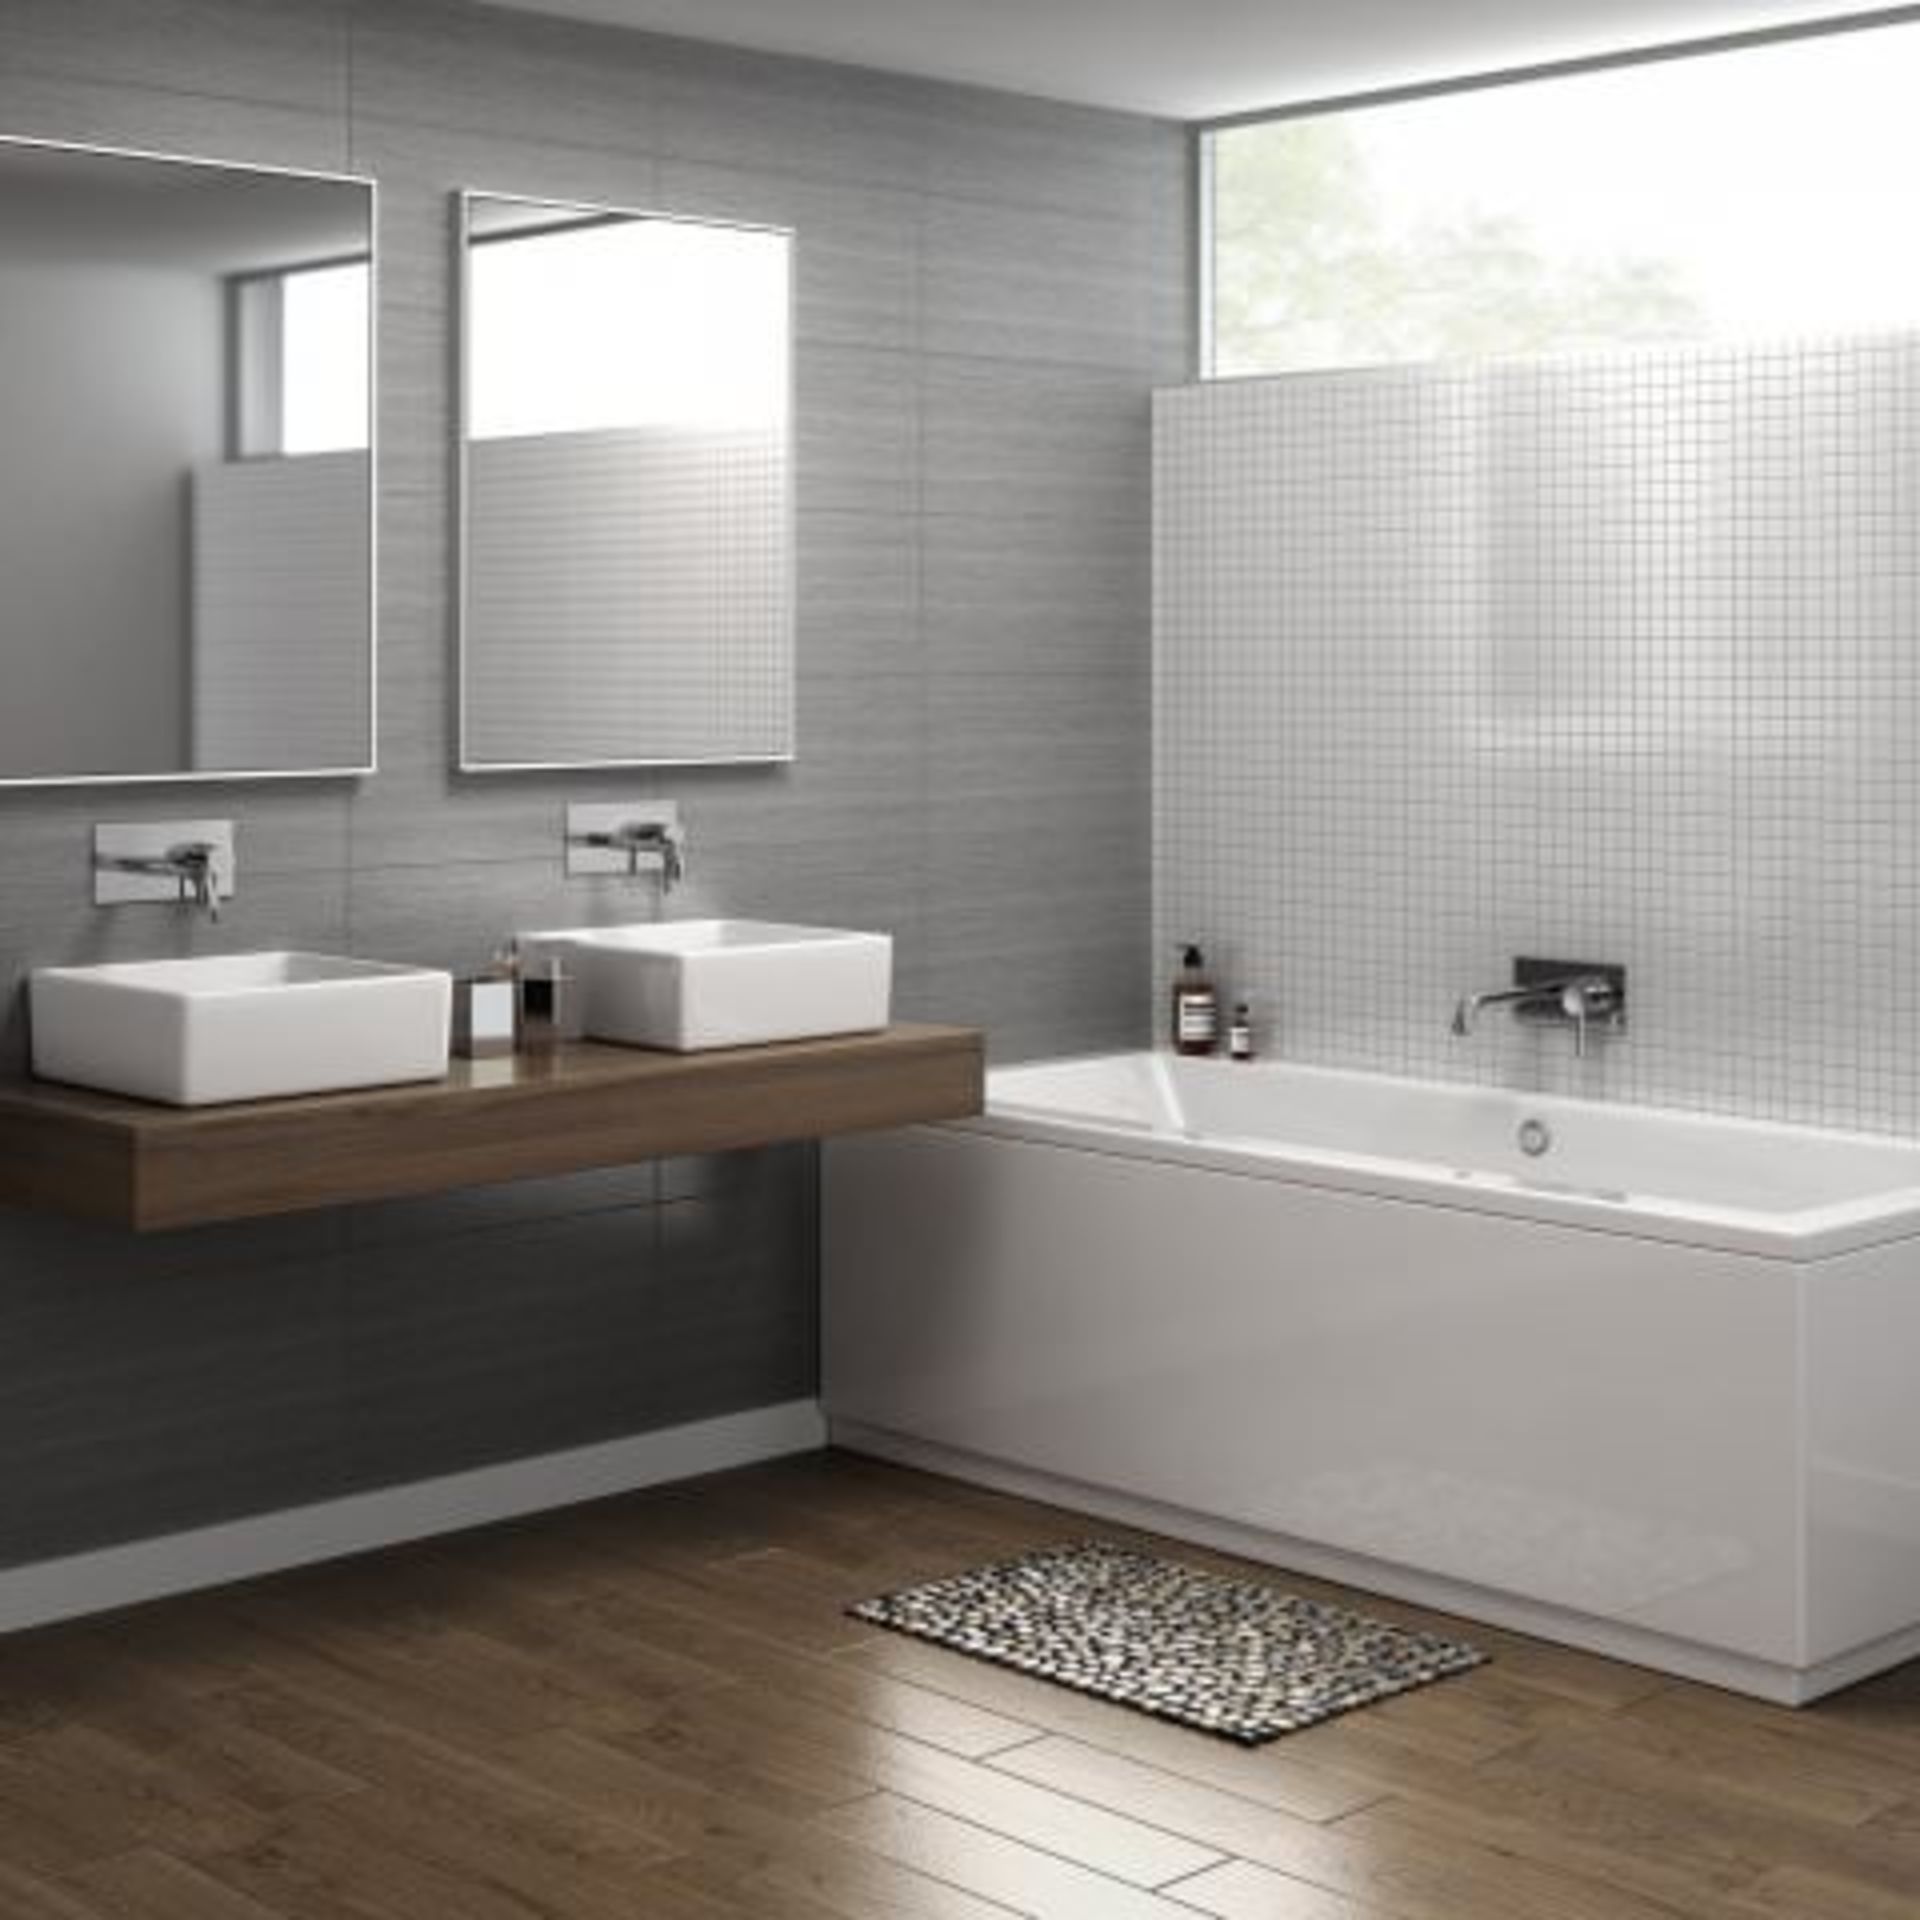 (I59) Gladstone Wall Mounted Basin Mixer Our Gladstone Range of taps are thoughtfully designed to - Image 3 of 3